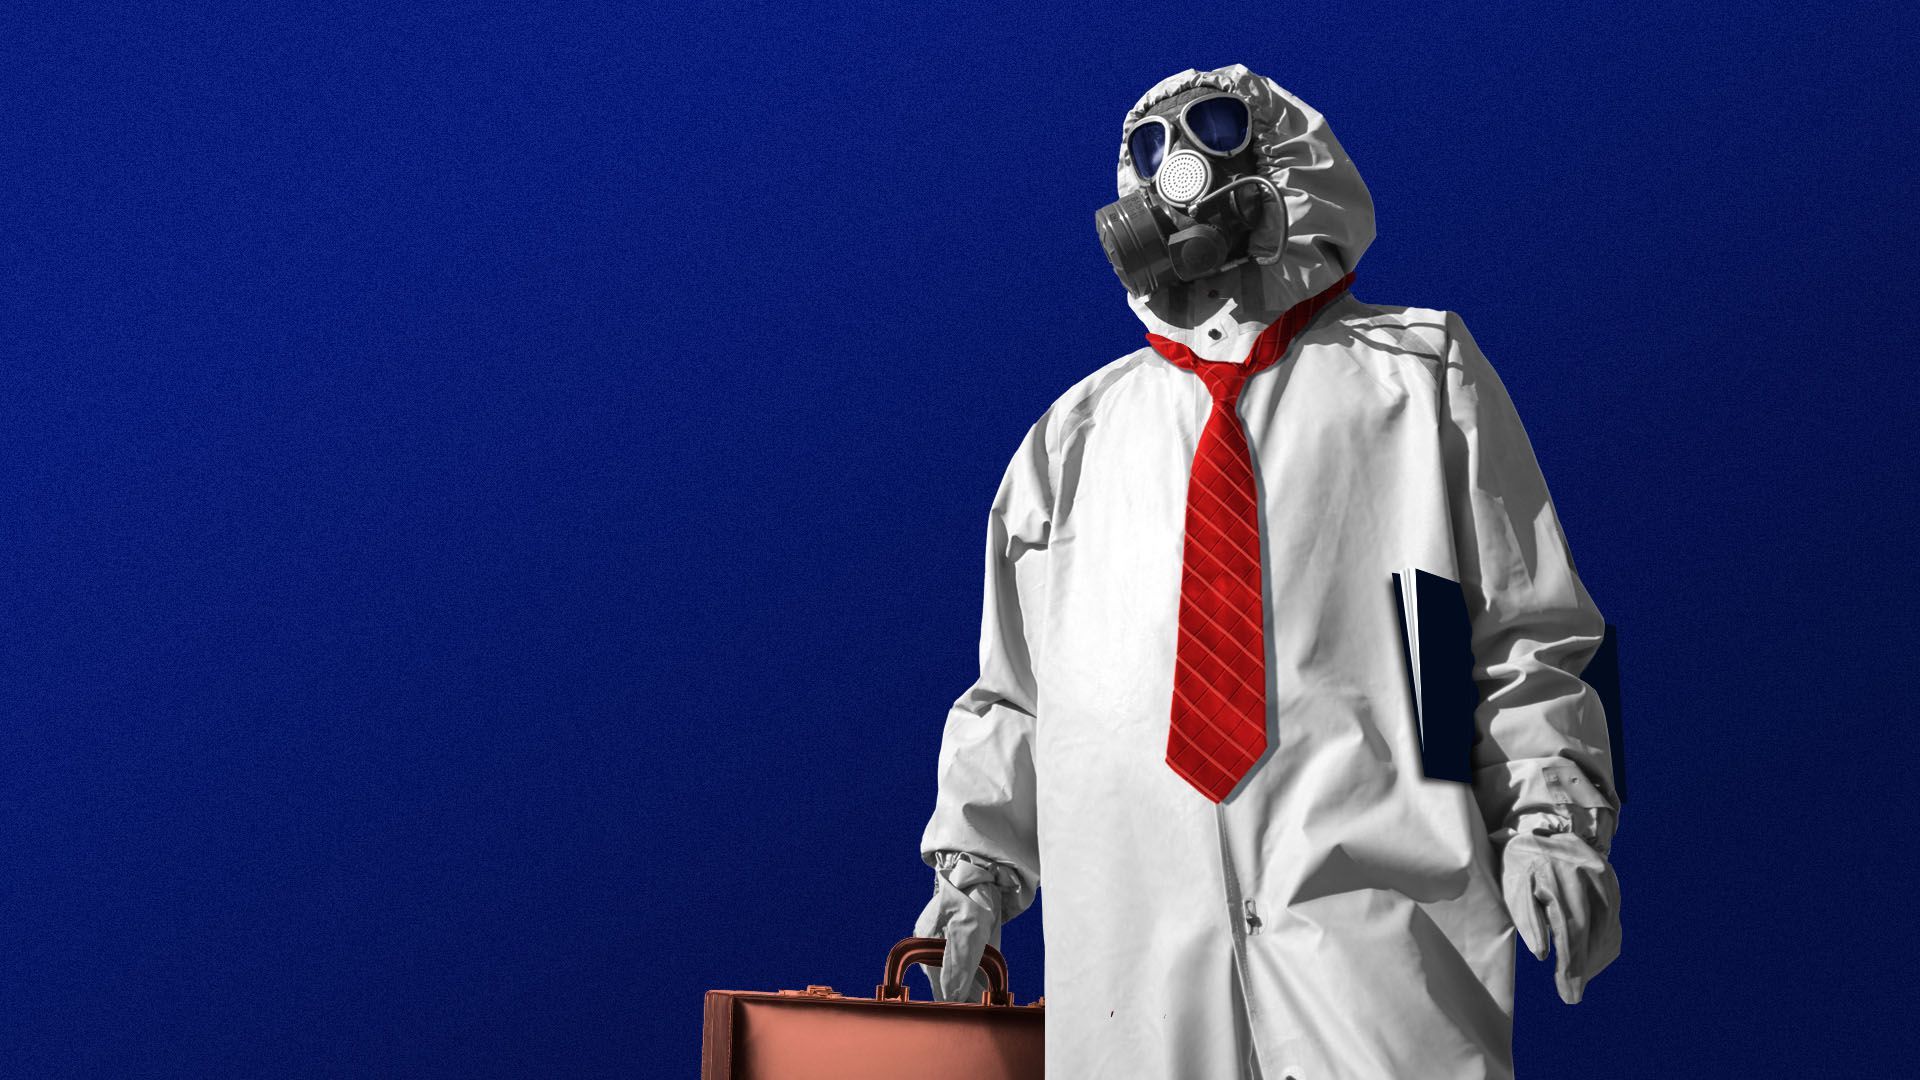 Illustration of a figure in a hazmat suit wearing a tie and holding a briefcase and a folder full of papers